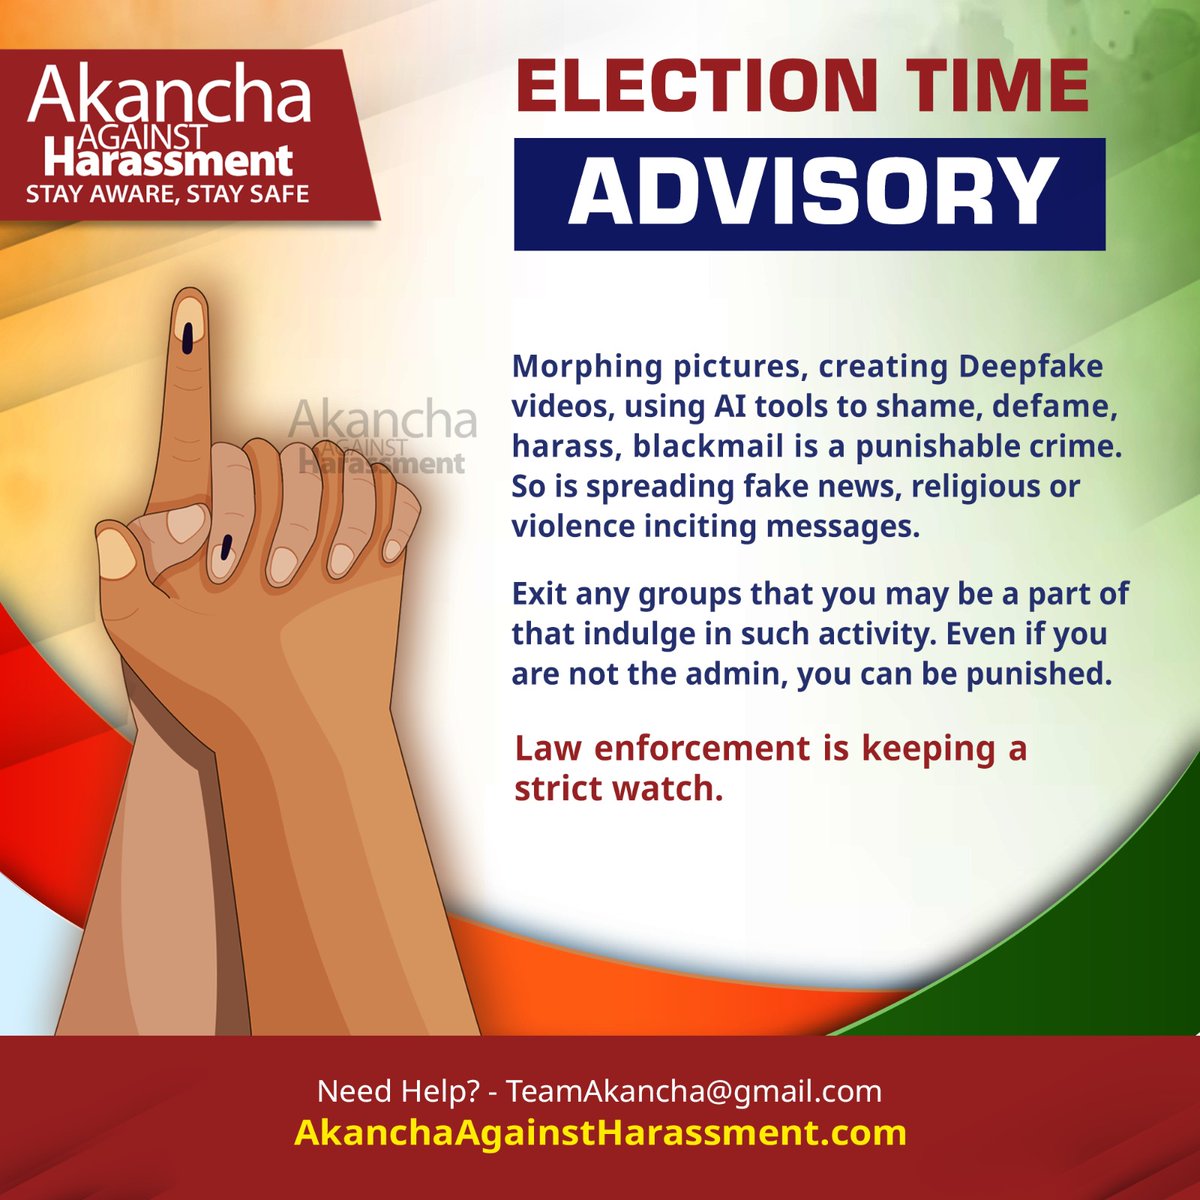 #PSA #IndiaElection2024
Don't get into trouble
#AAH #CyberSafety